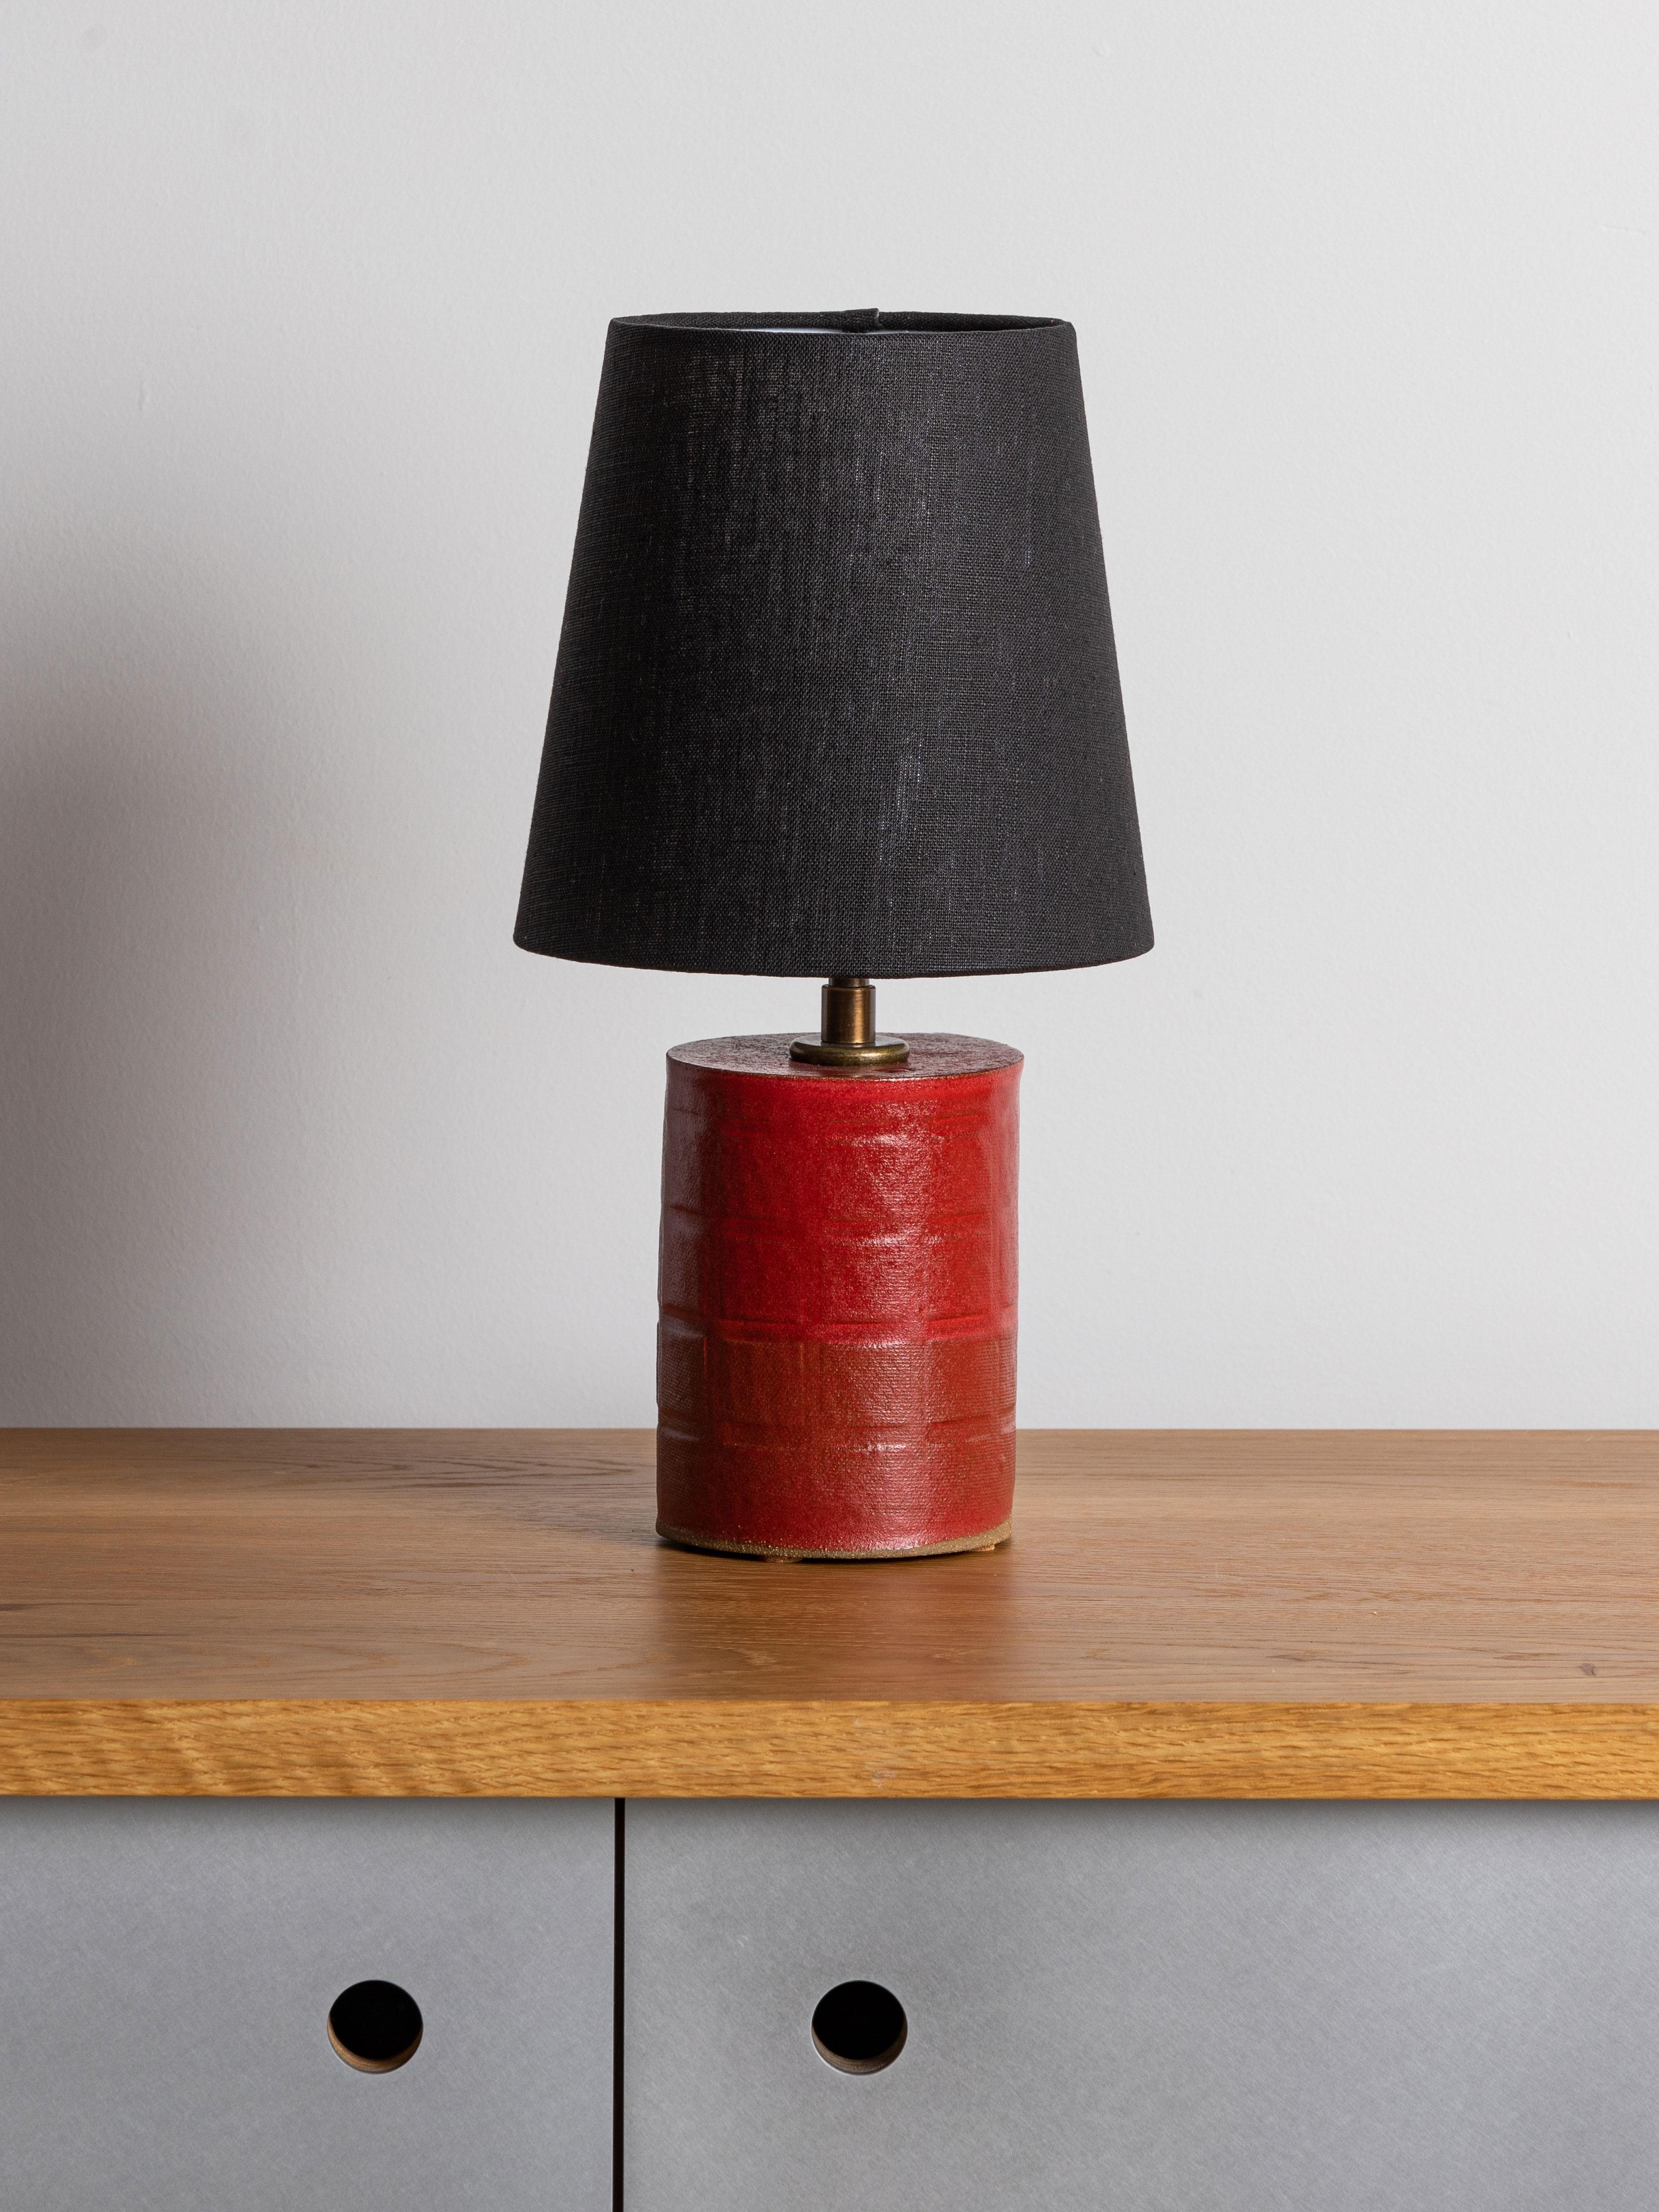 Our stoneware Cornwall Lamp is handcrafted using slab-construction techniques. The lamp’s pattern is created by rolling the surface with textured rolling pins and rods.

Finish

- Dipped glaze, pictured in cherry
- Antique brass fittings
- Twisted